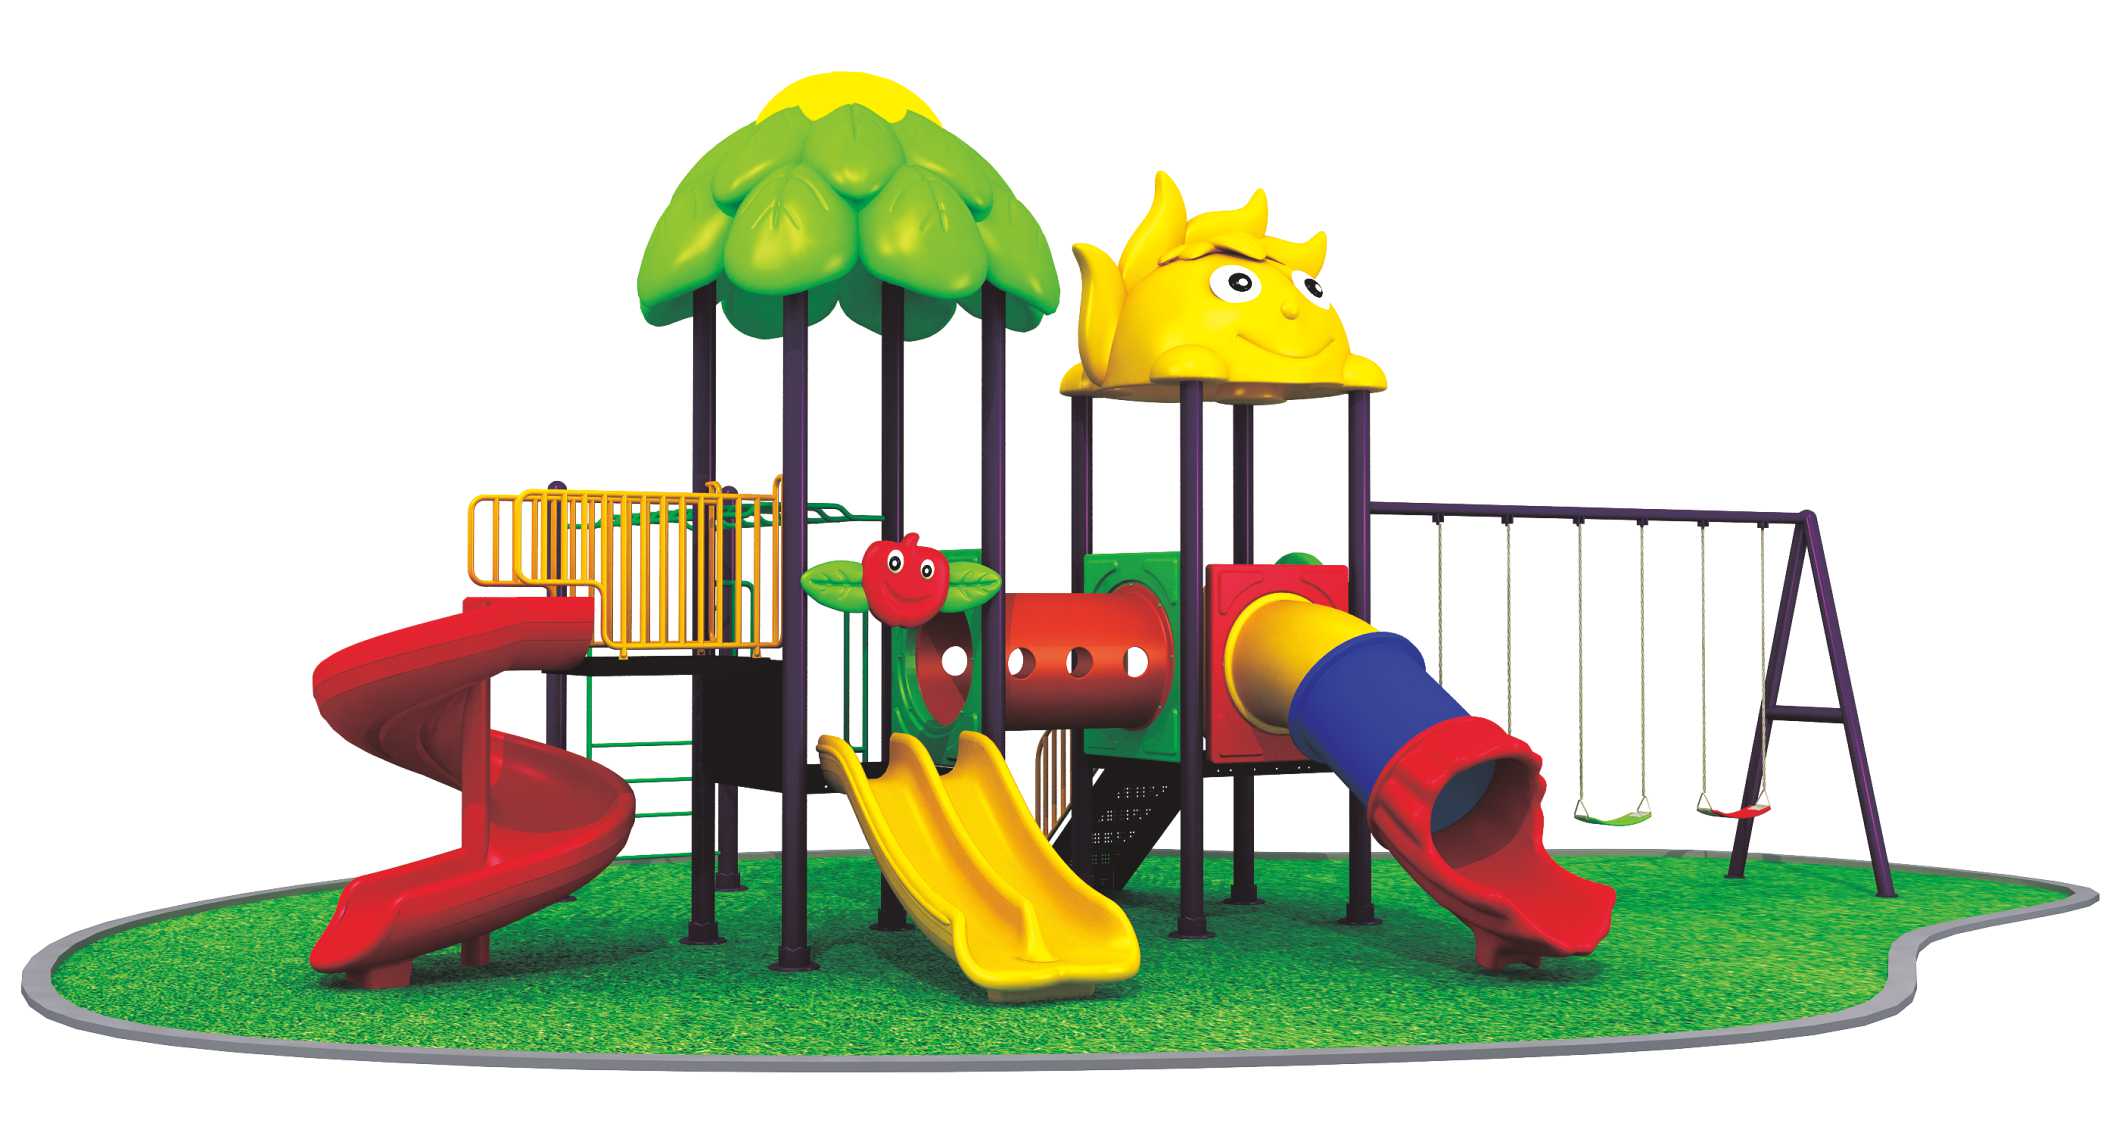 Rbwtoys Outdoor Play Toys Slide For Kids And Swing For Kids Playground Toys High Quality For Kids Activities Set Model No. RW-12005 Size 600&times;500&times;340cm